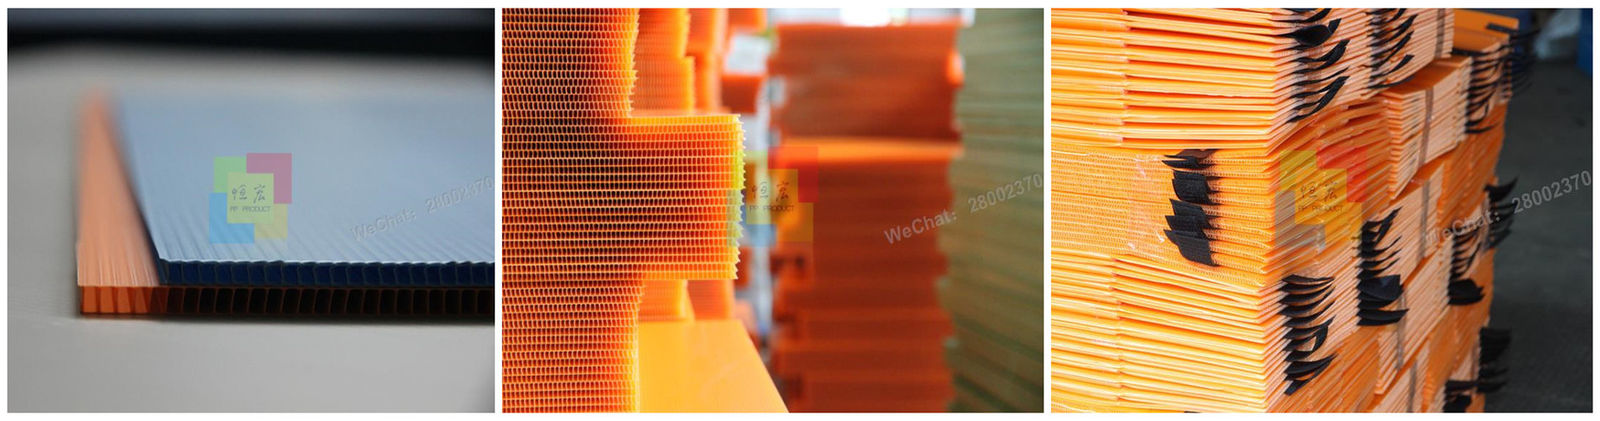 PP Corrugated Plastic Sheets